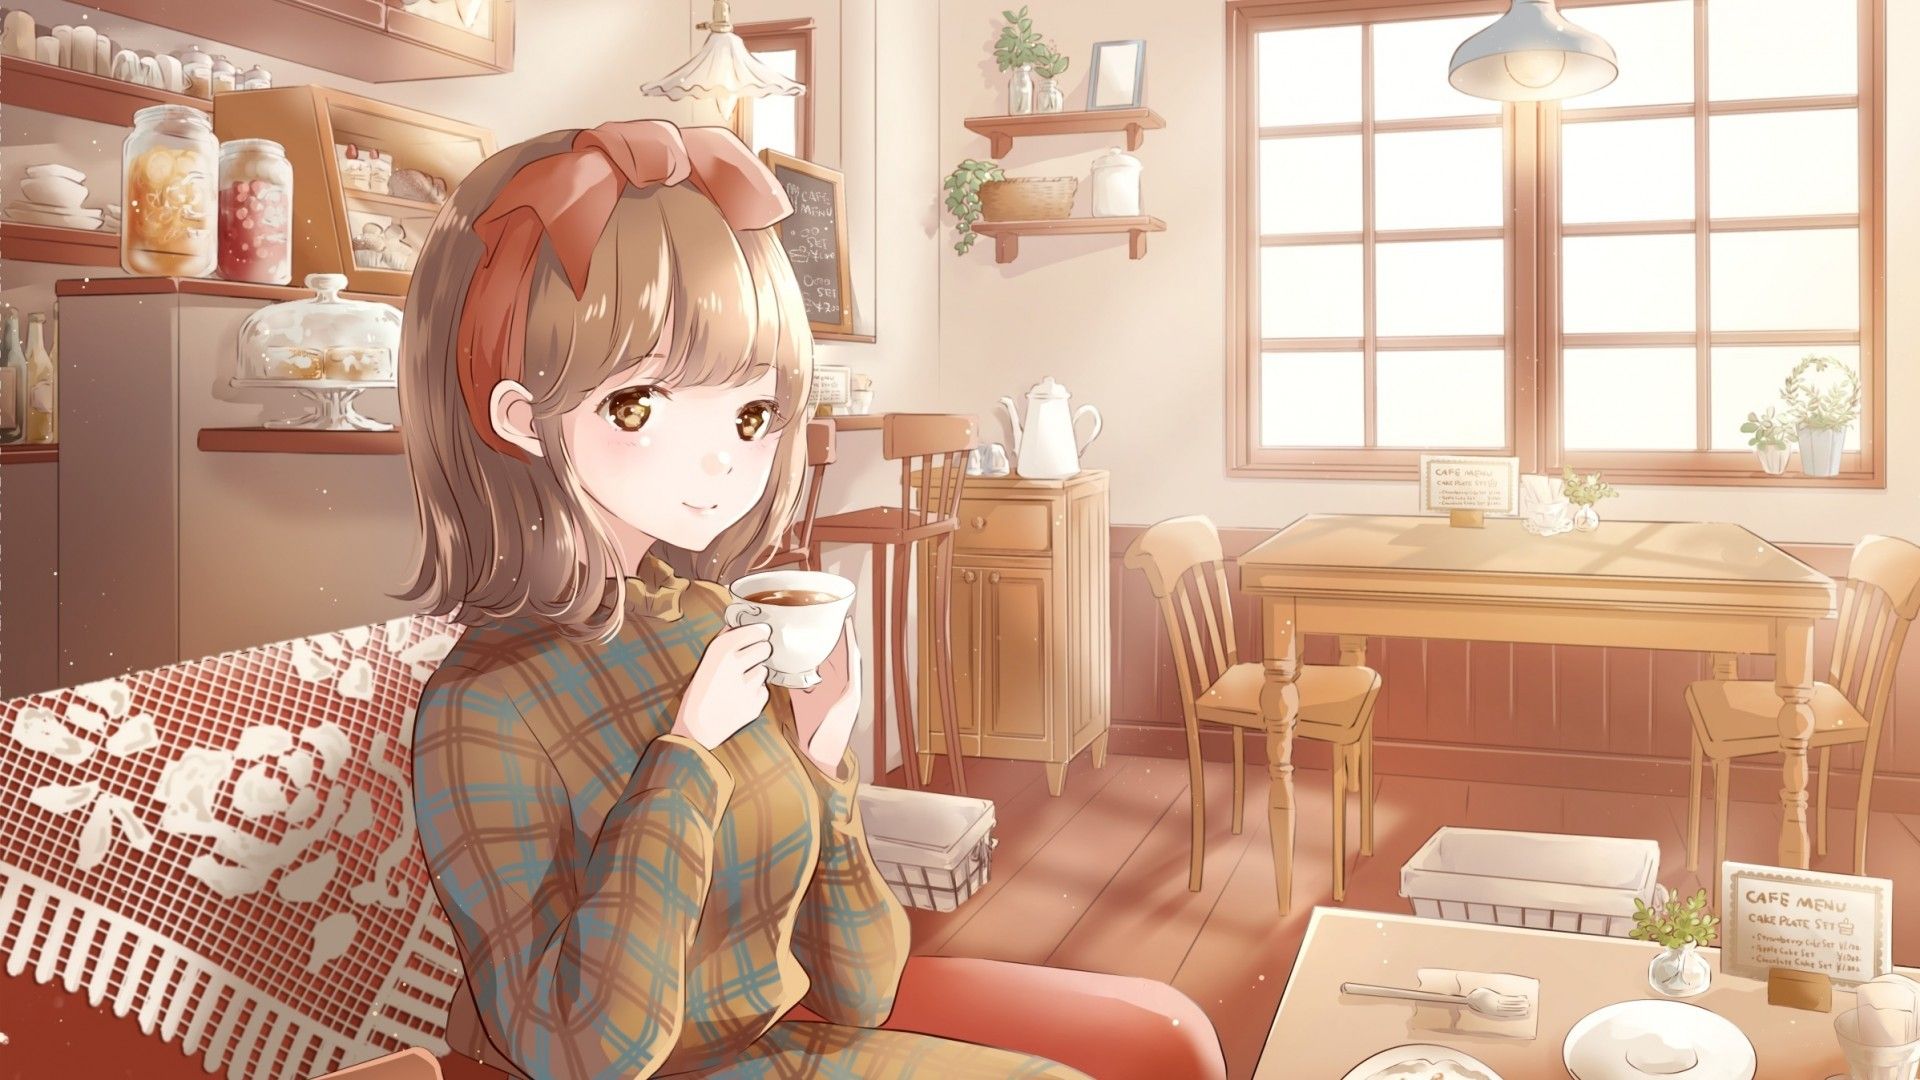 Download 1920x1080 Anime Girl, Cozy Coffee Shop, Drinks, Smiling, Food, Couch Wallpaper for Widescreen